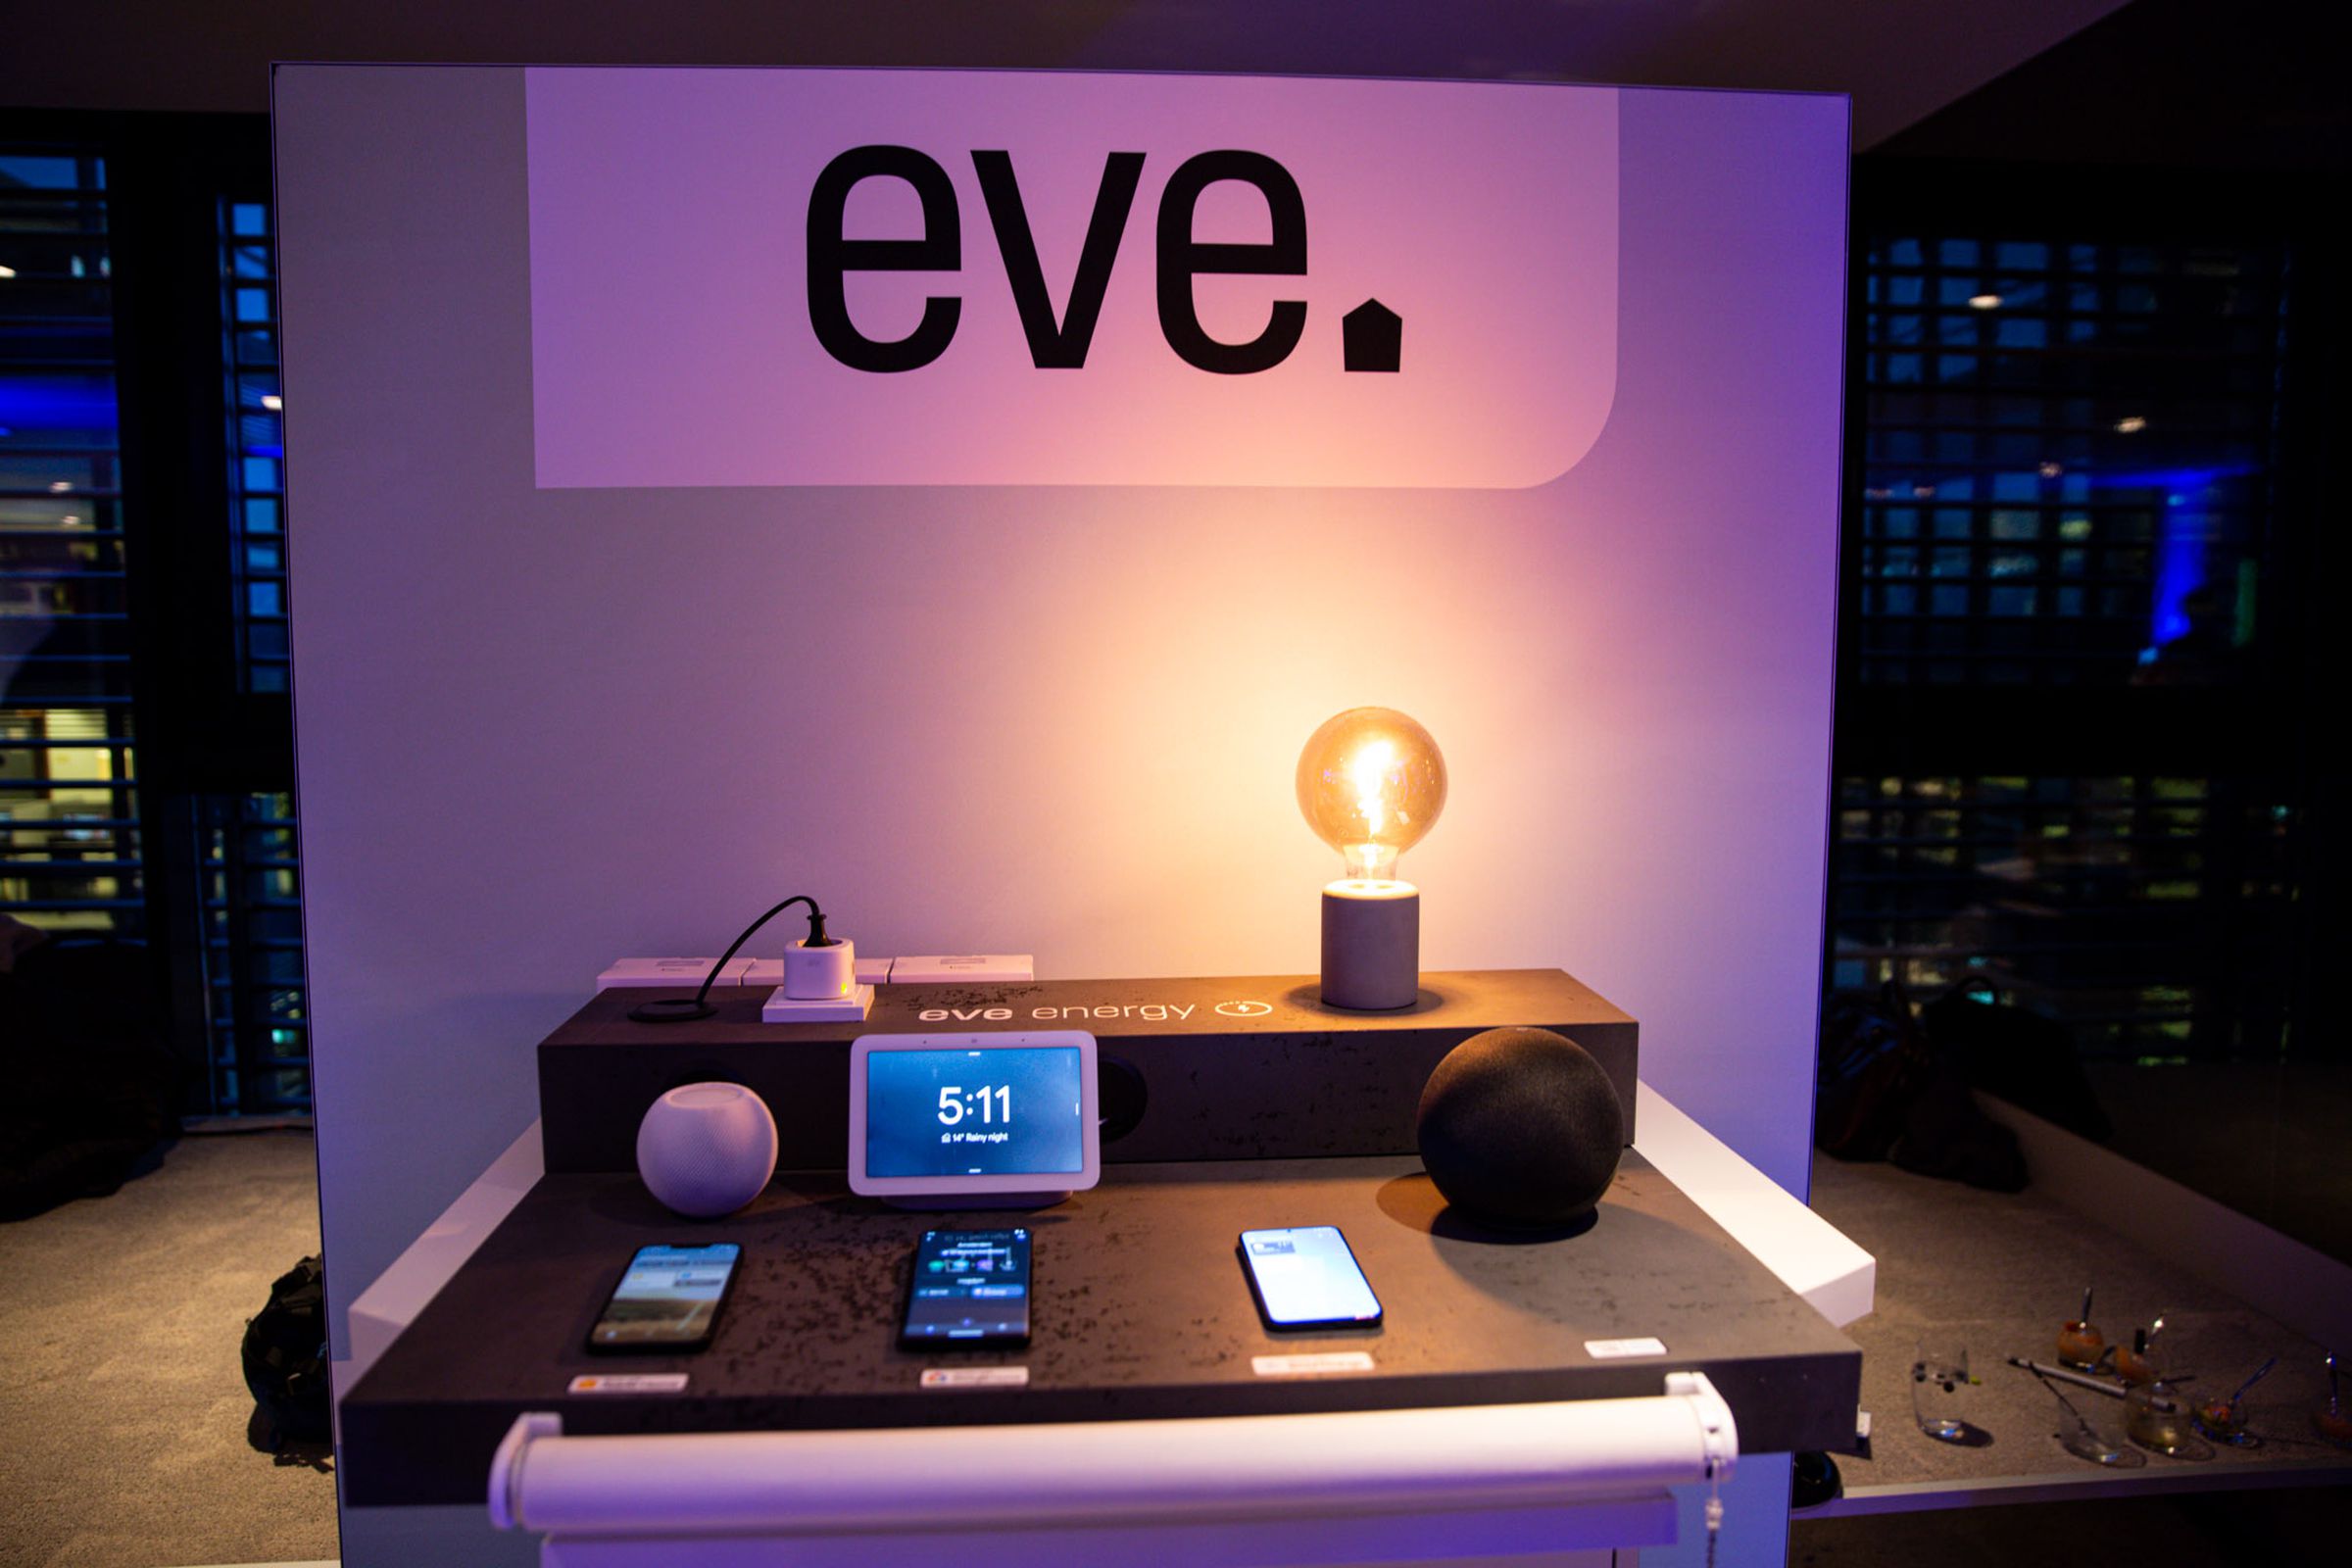 The Eve booth had four potential Thread border routers in action (the SmartThings hub was under the table). The Thread radios in the Nest Hub and Echo haven’t been turned on yet.